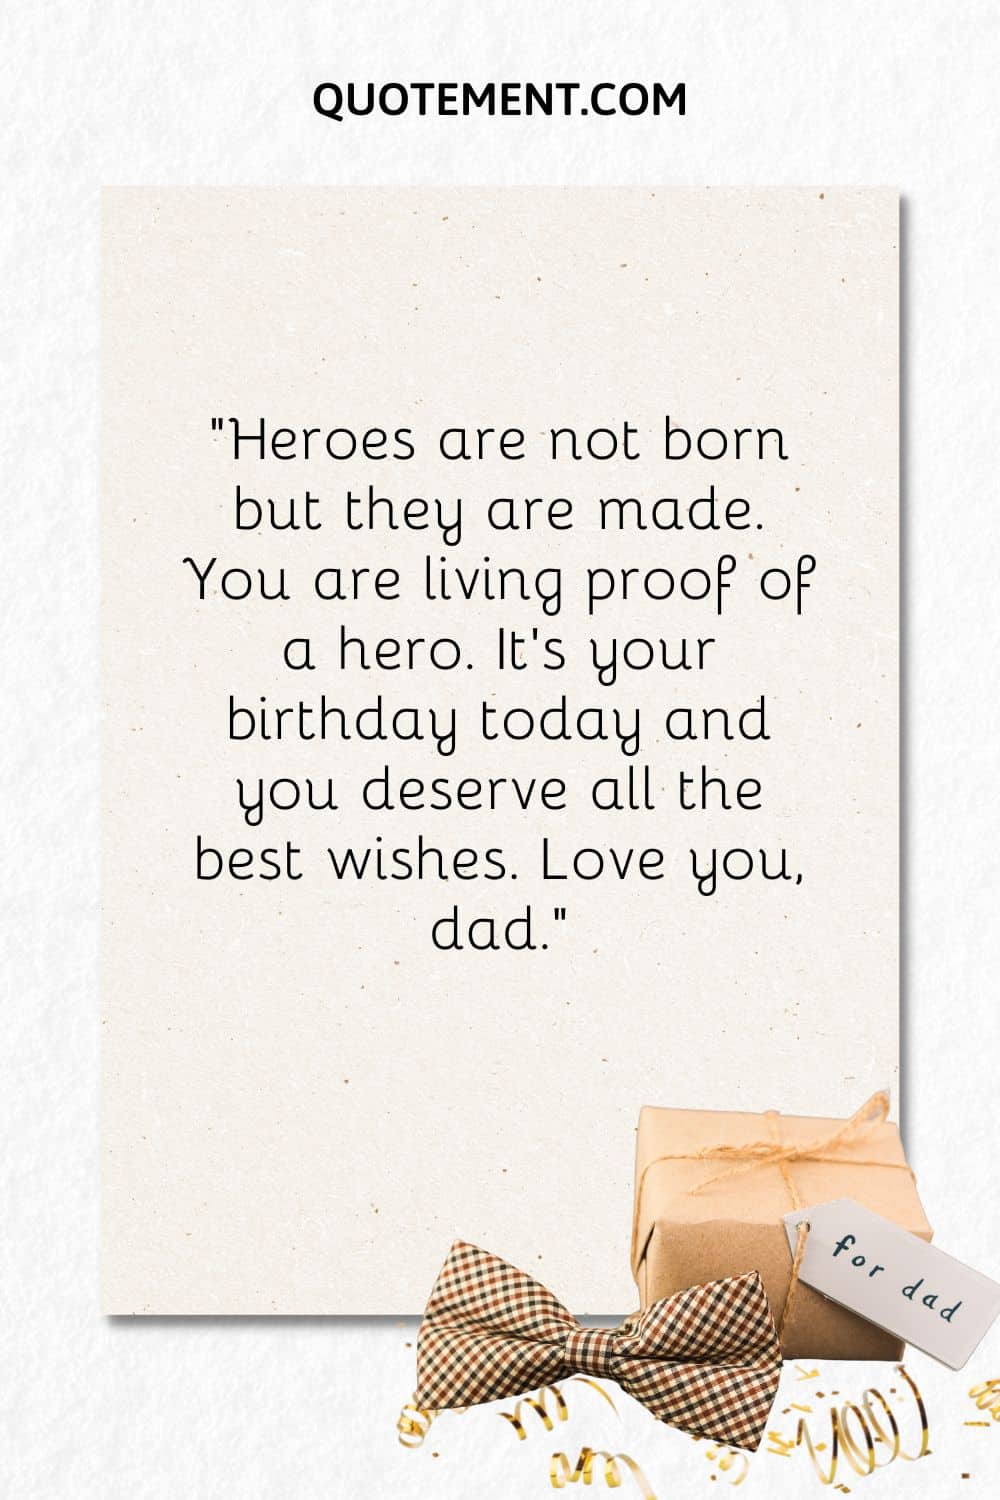 “Heroes are not born but they are made. You are living proof of a hero. It’s your birthday today and you deserve all the best wishes. Love you, dad.”